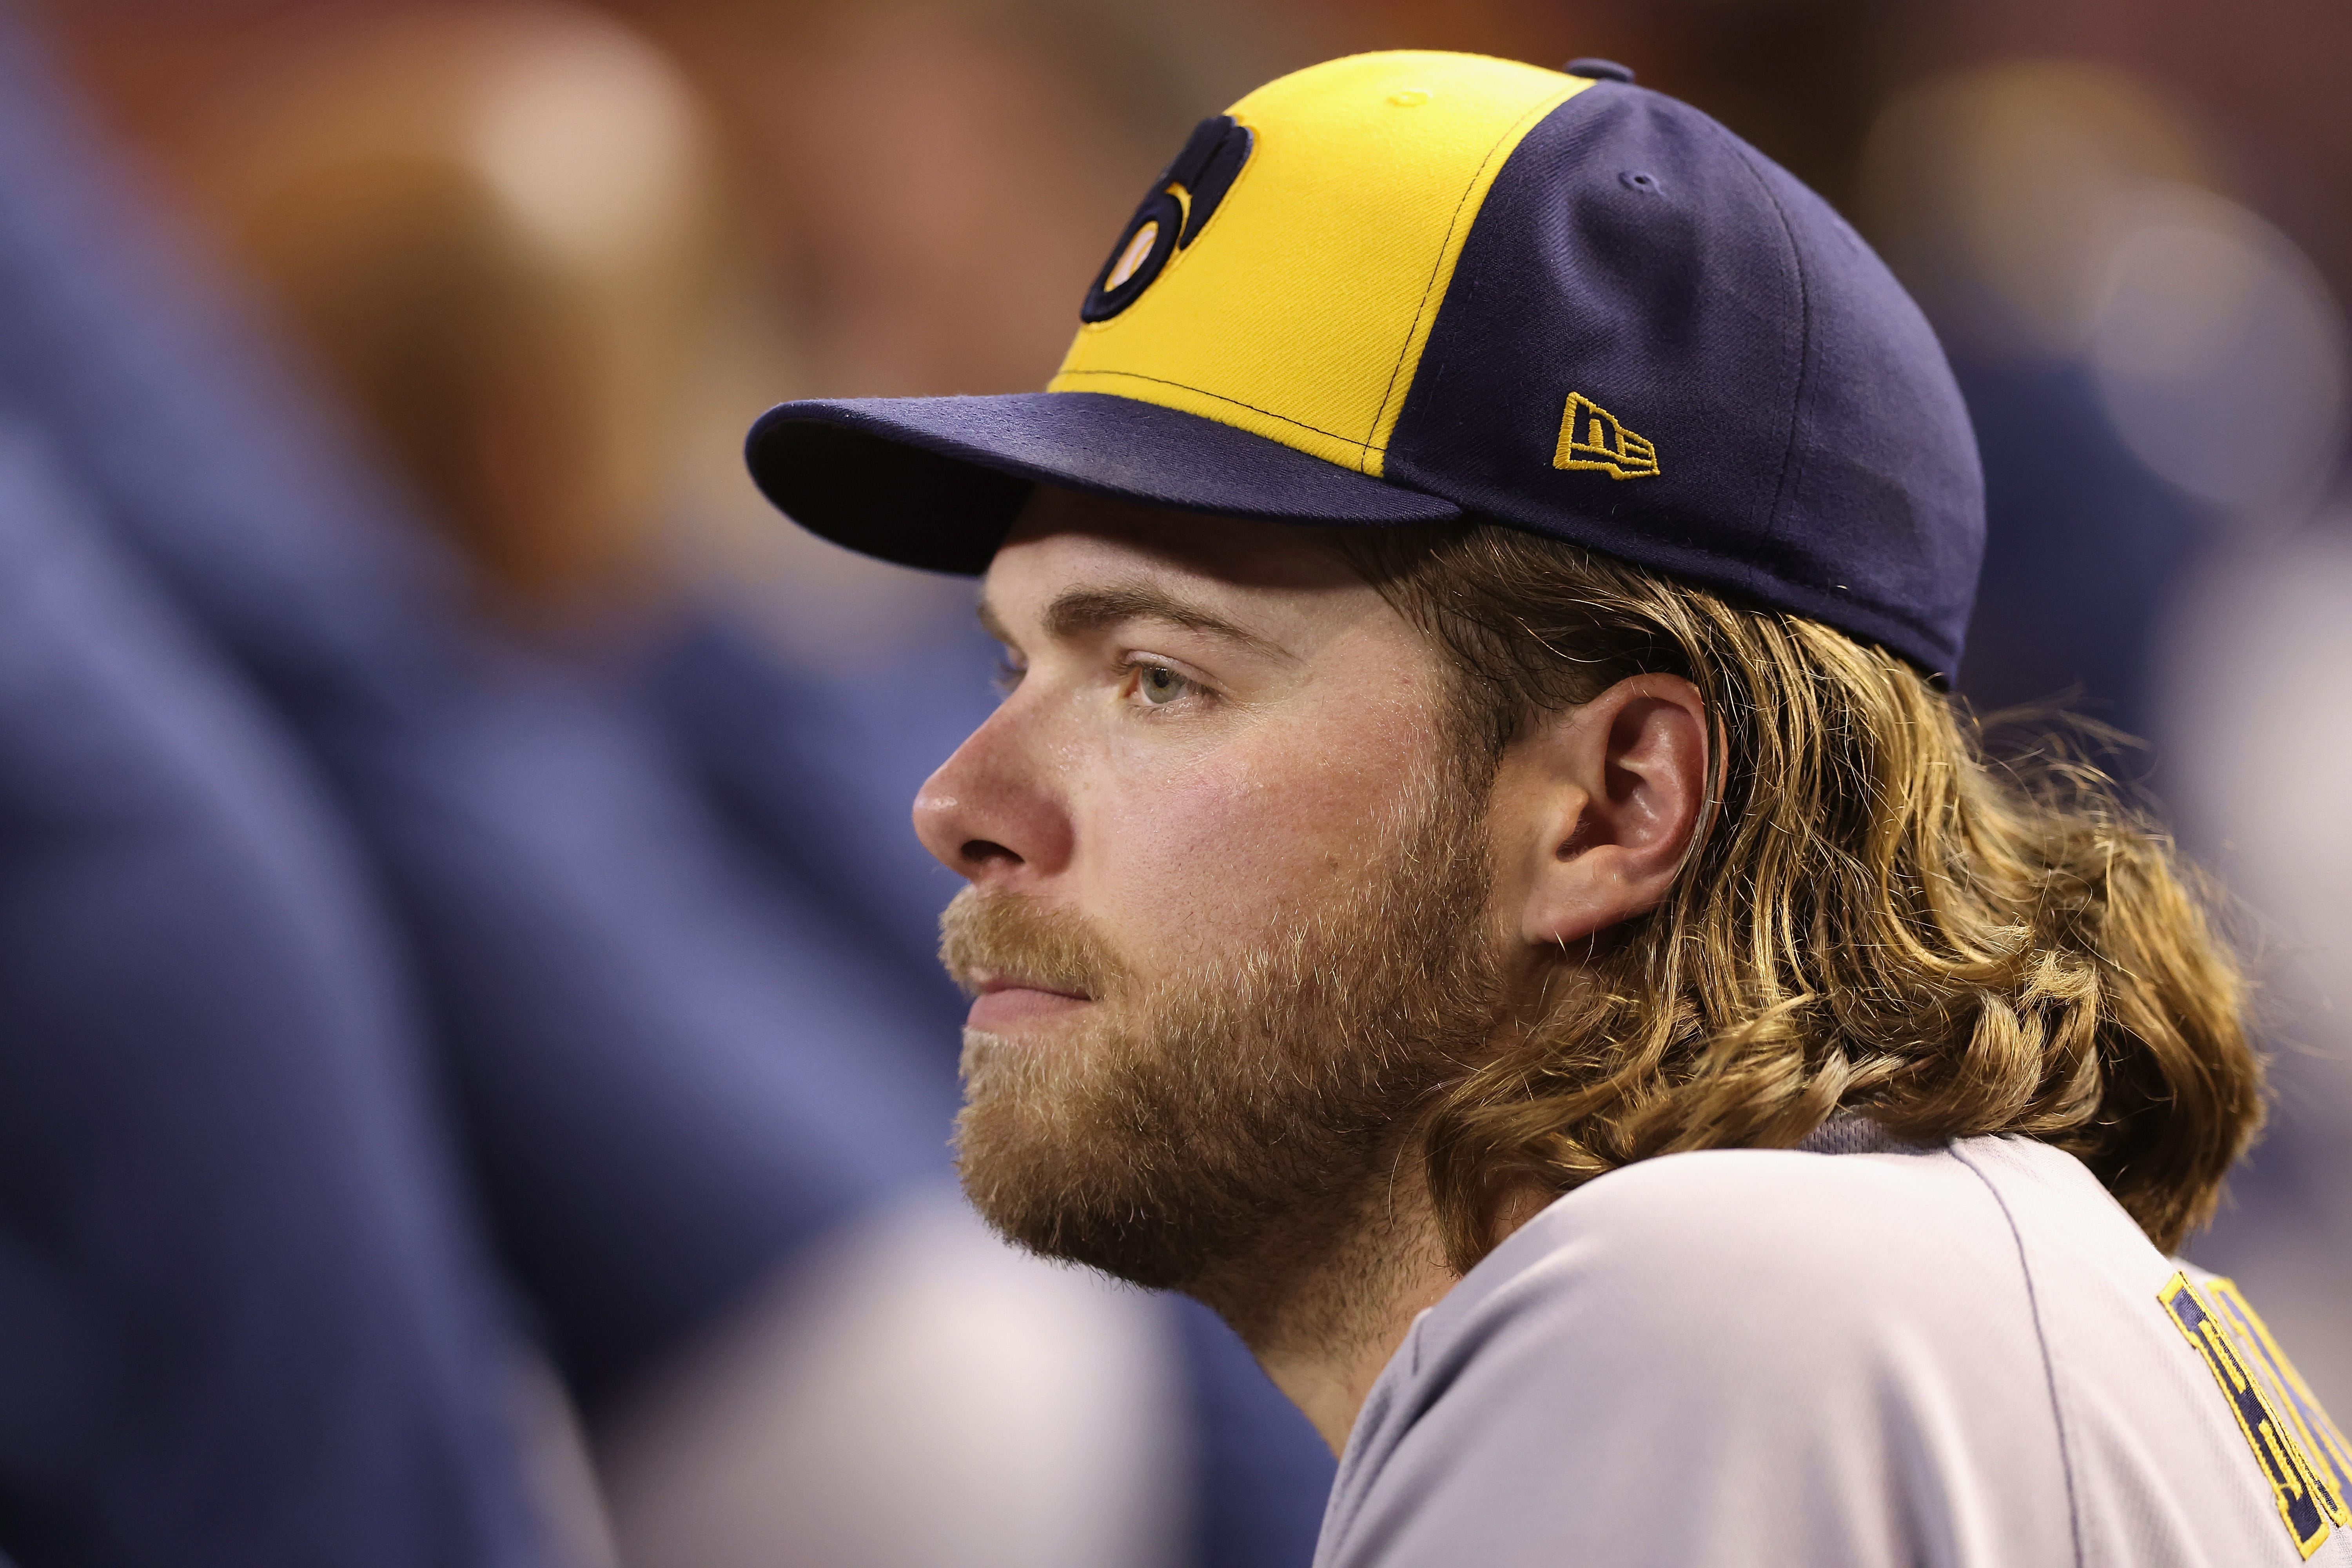 This series had me wondering: How is Josh Hader doing his hair?